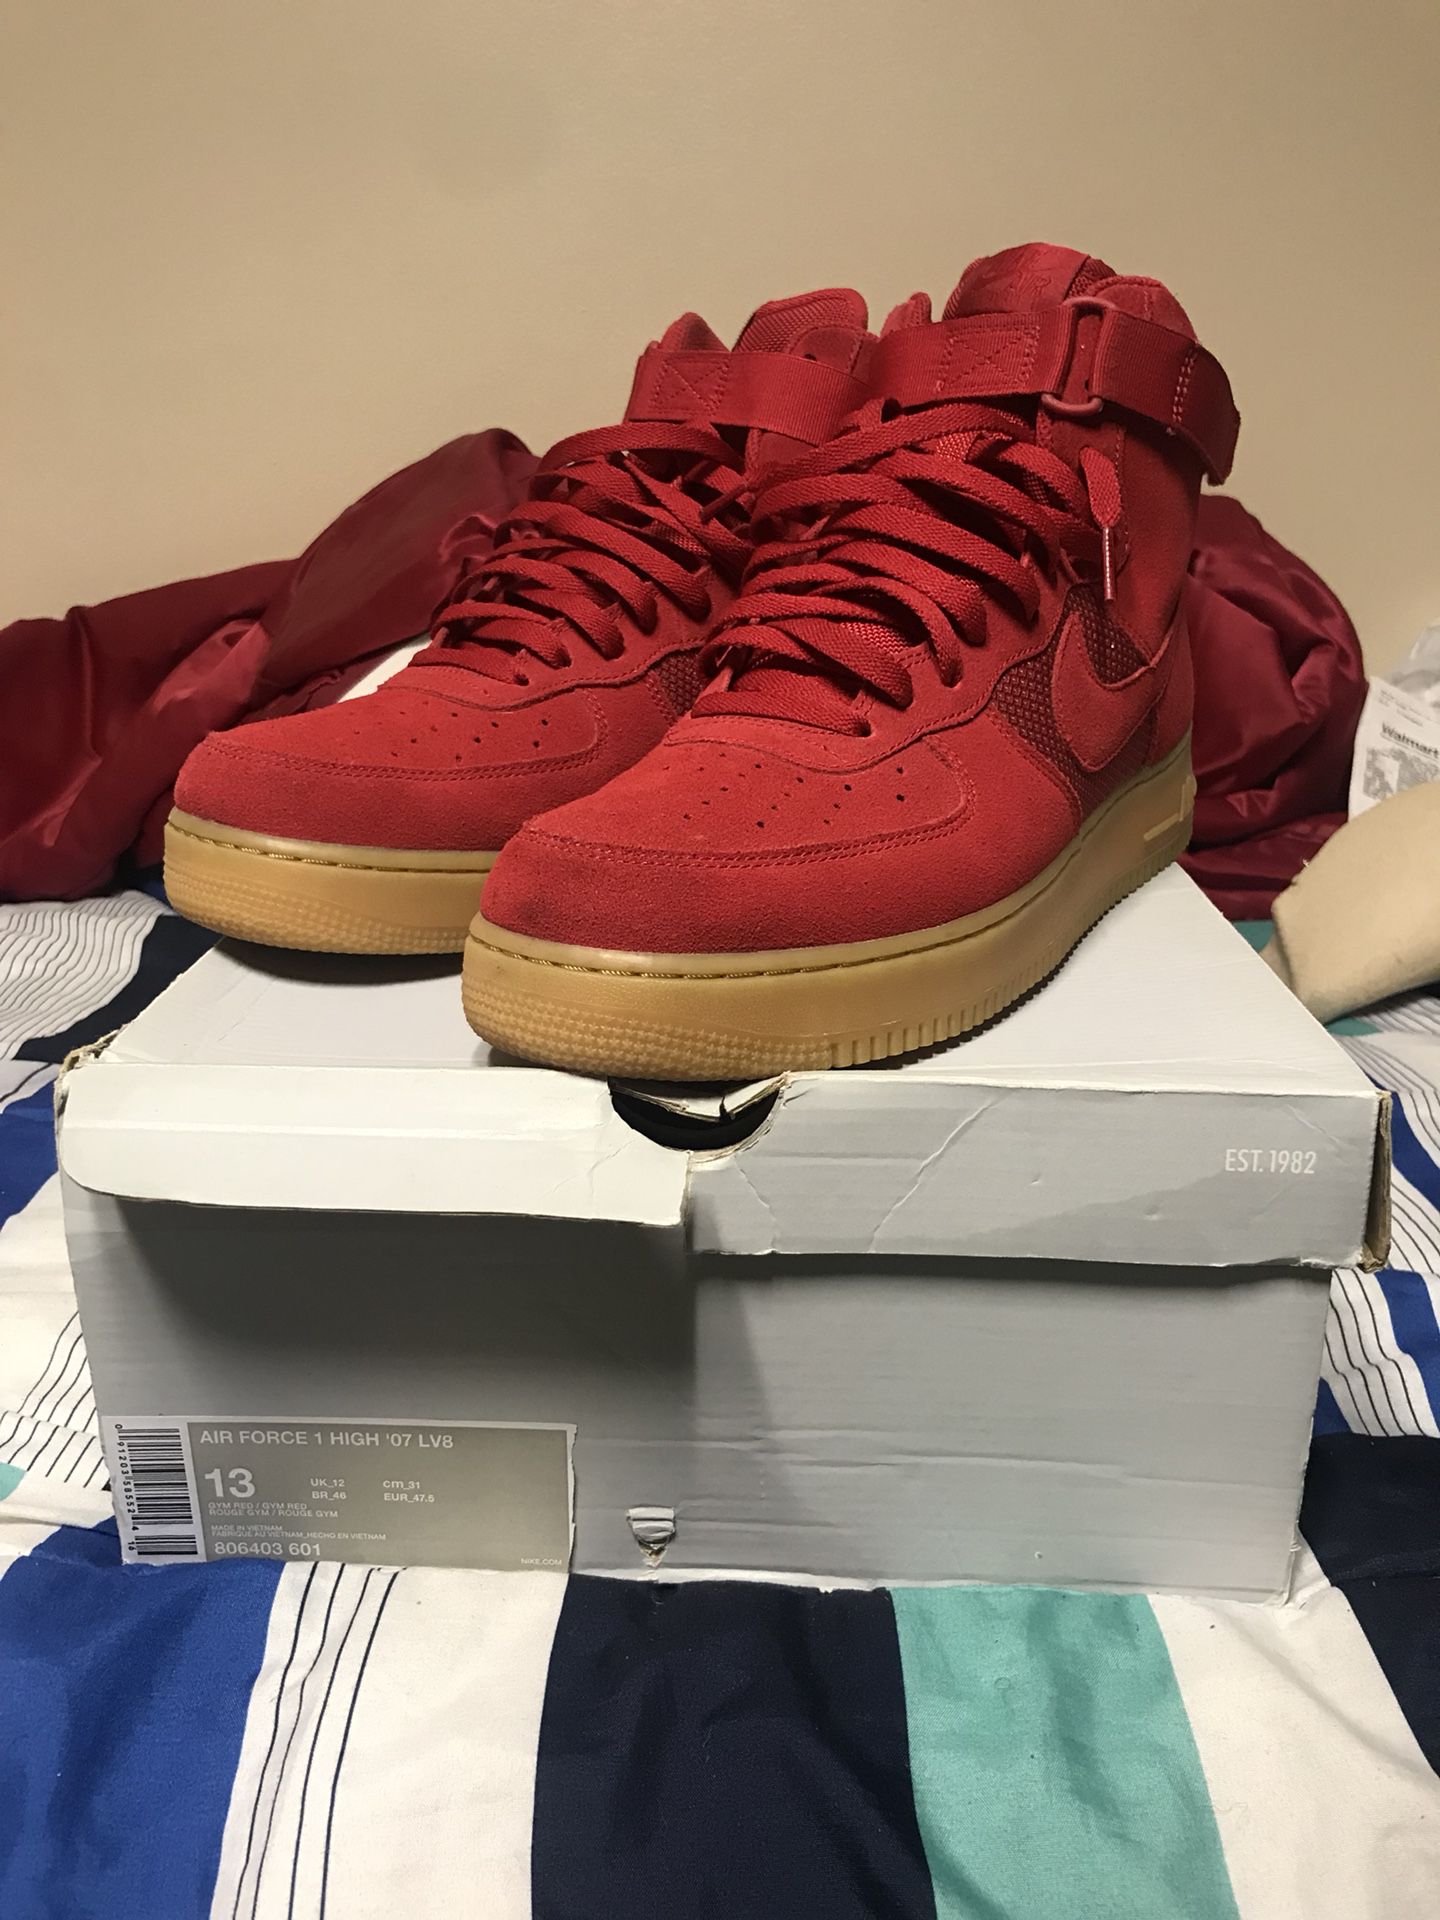 Nike Air Force 1 High 07 LV8 Red Suede Gum Sole 806403-601 Shoes Size 11.5